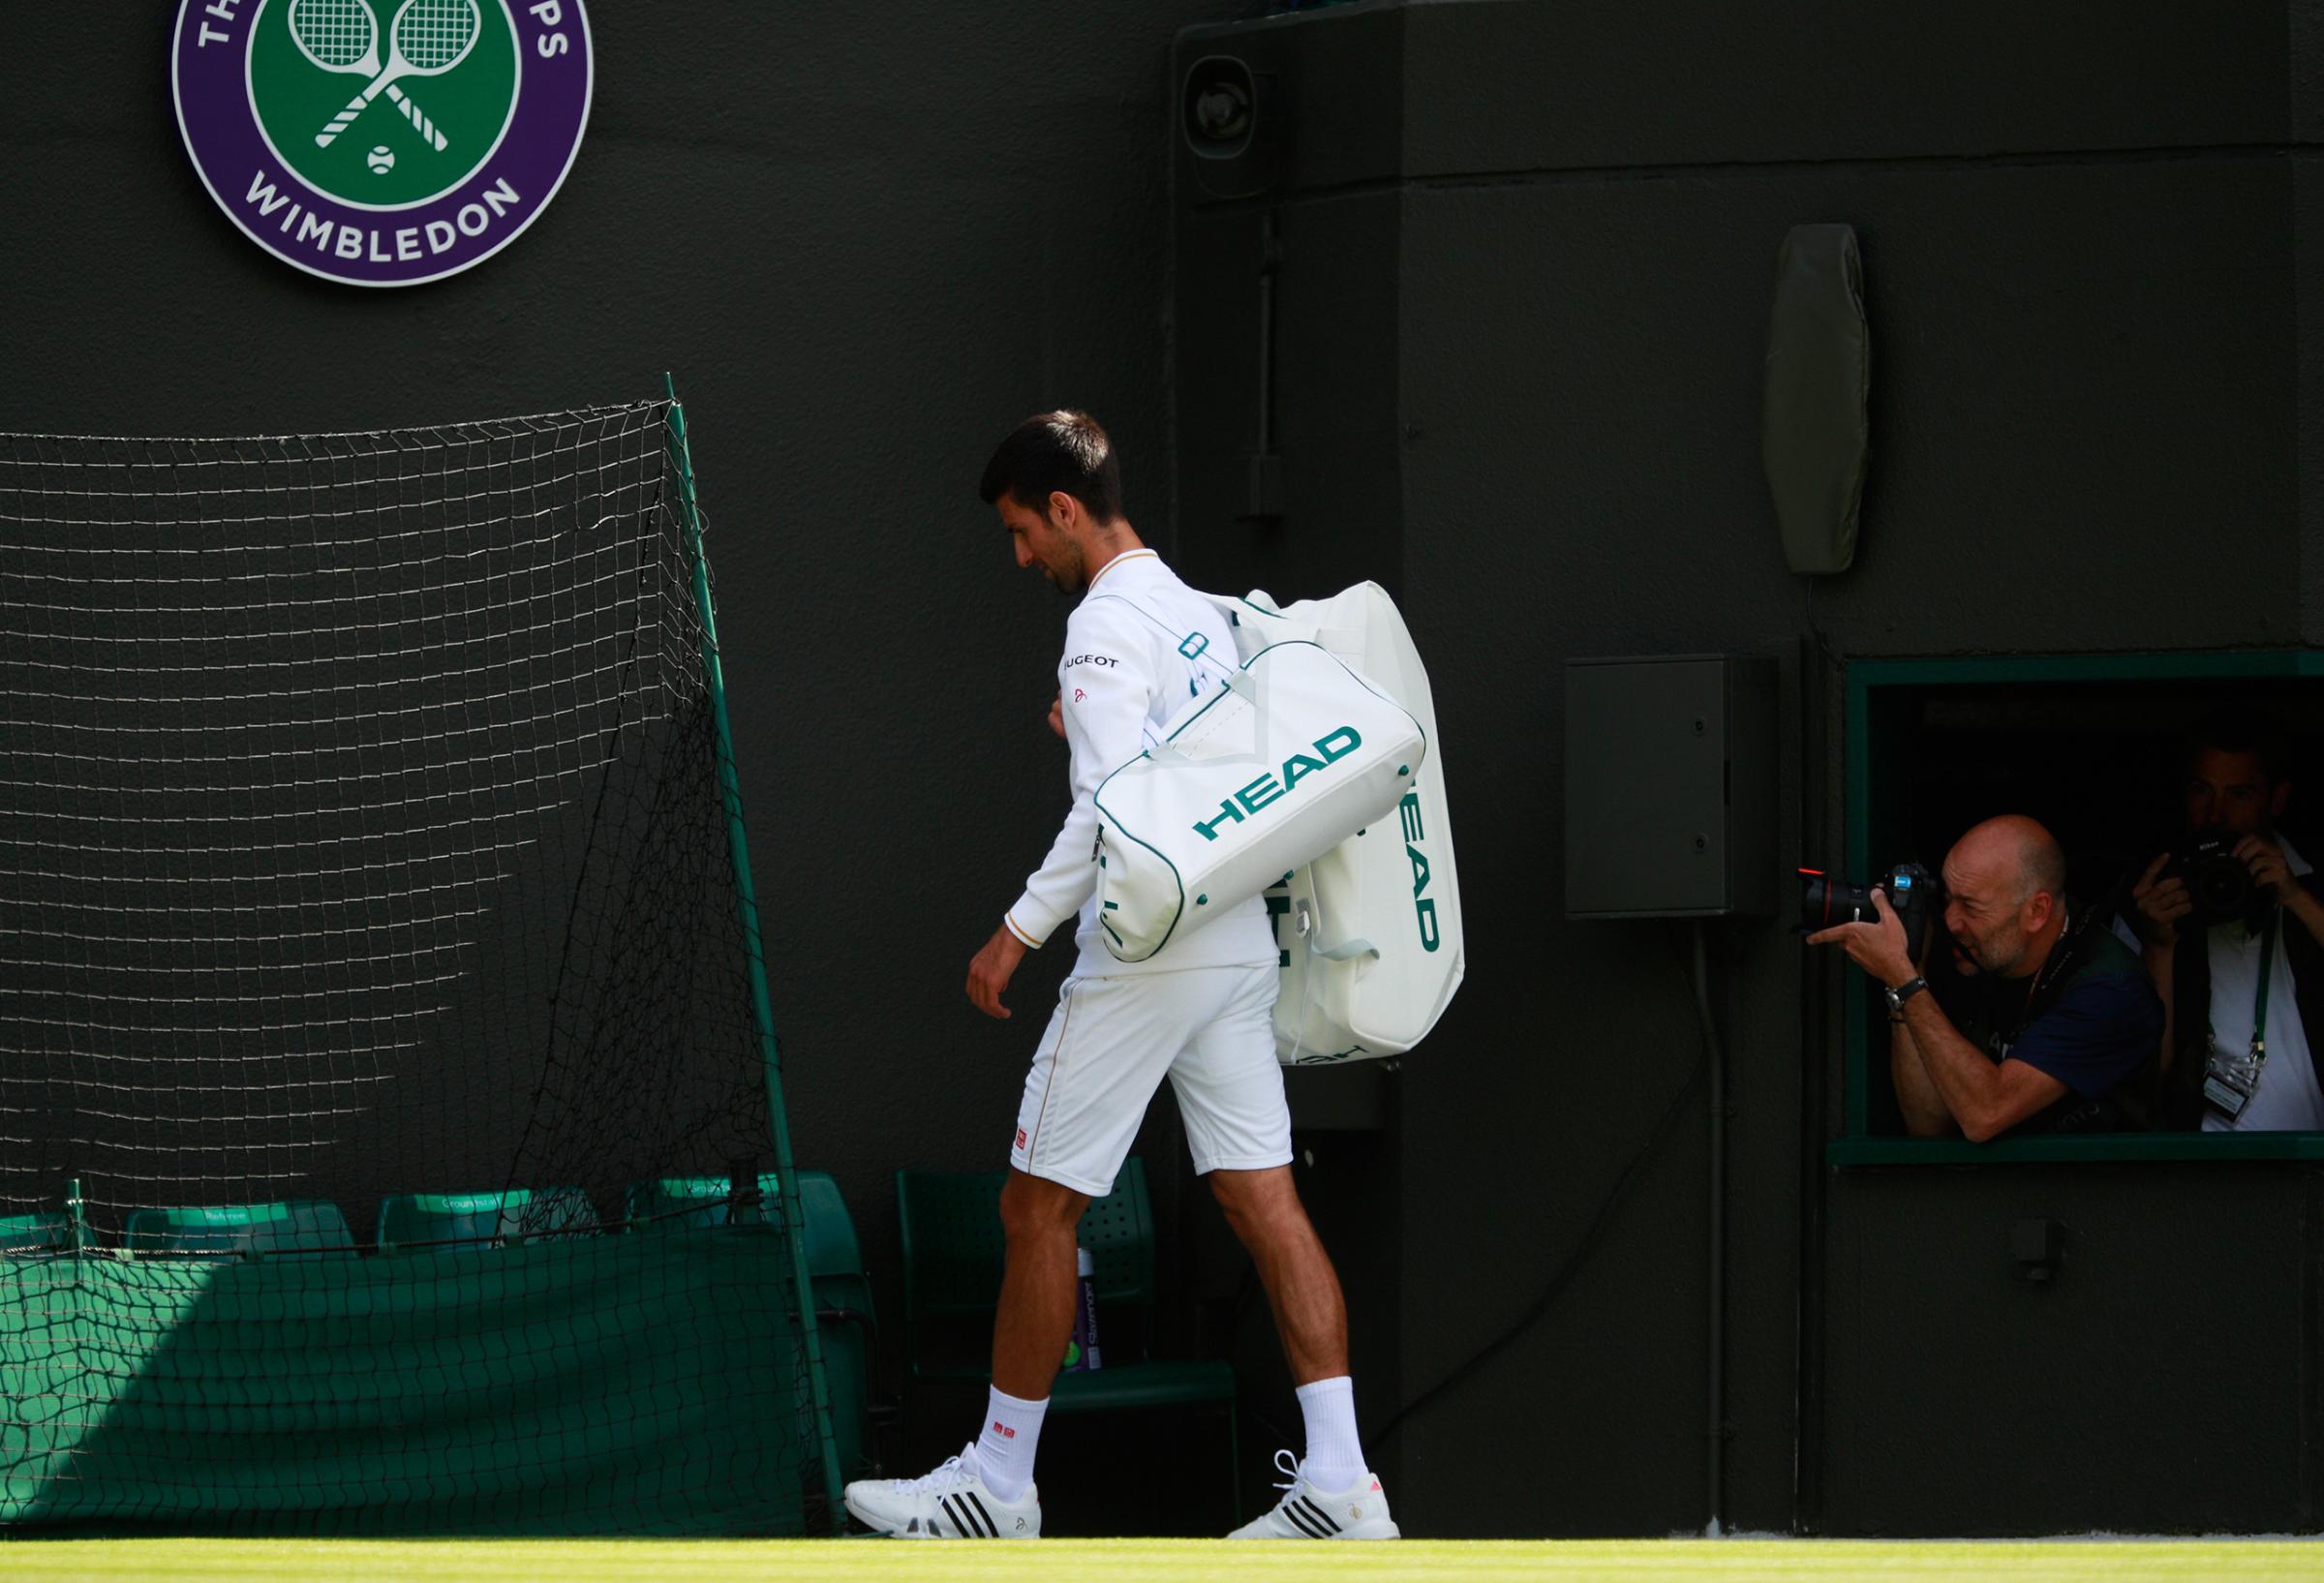 Novak Djokovic of Serbia walks off the court following defeat in the Men's Singles third round match against Sam Querrey of the United States on day six of the Wimbledon Lawn Tennis Championships in London on July 2, 2016.